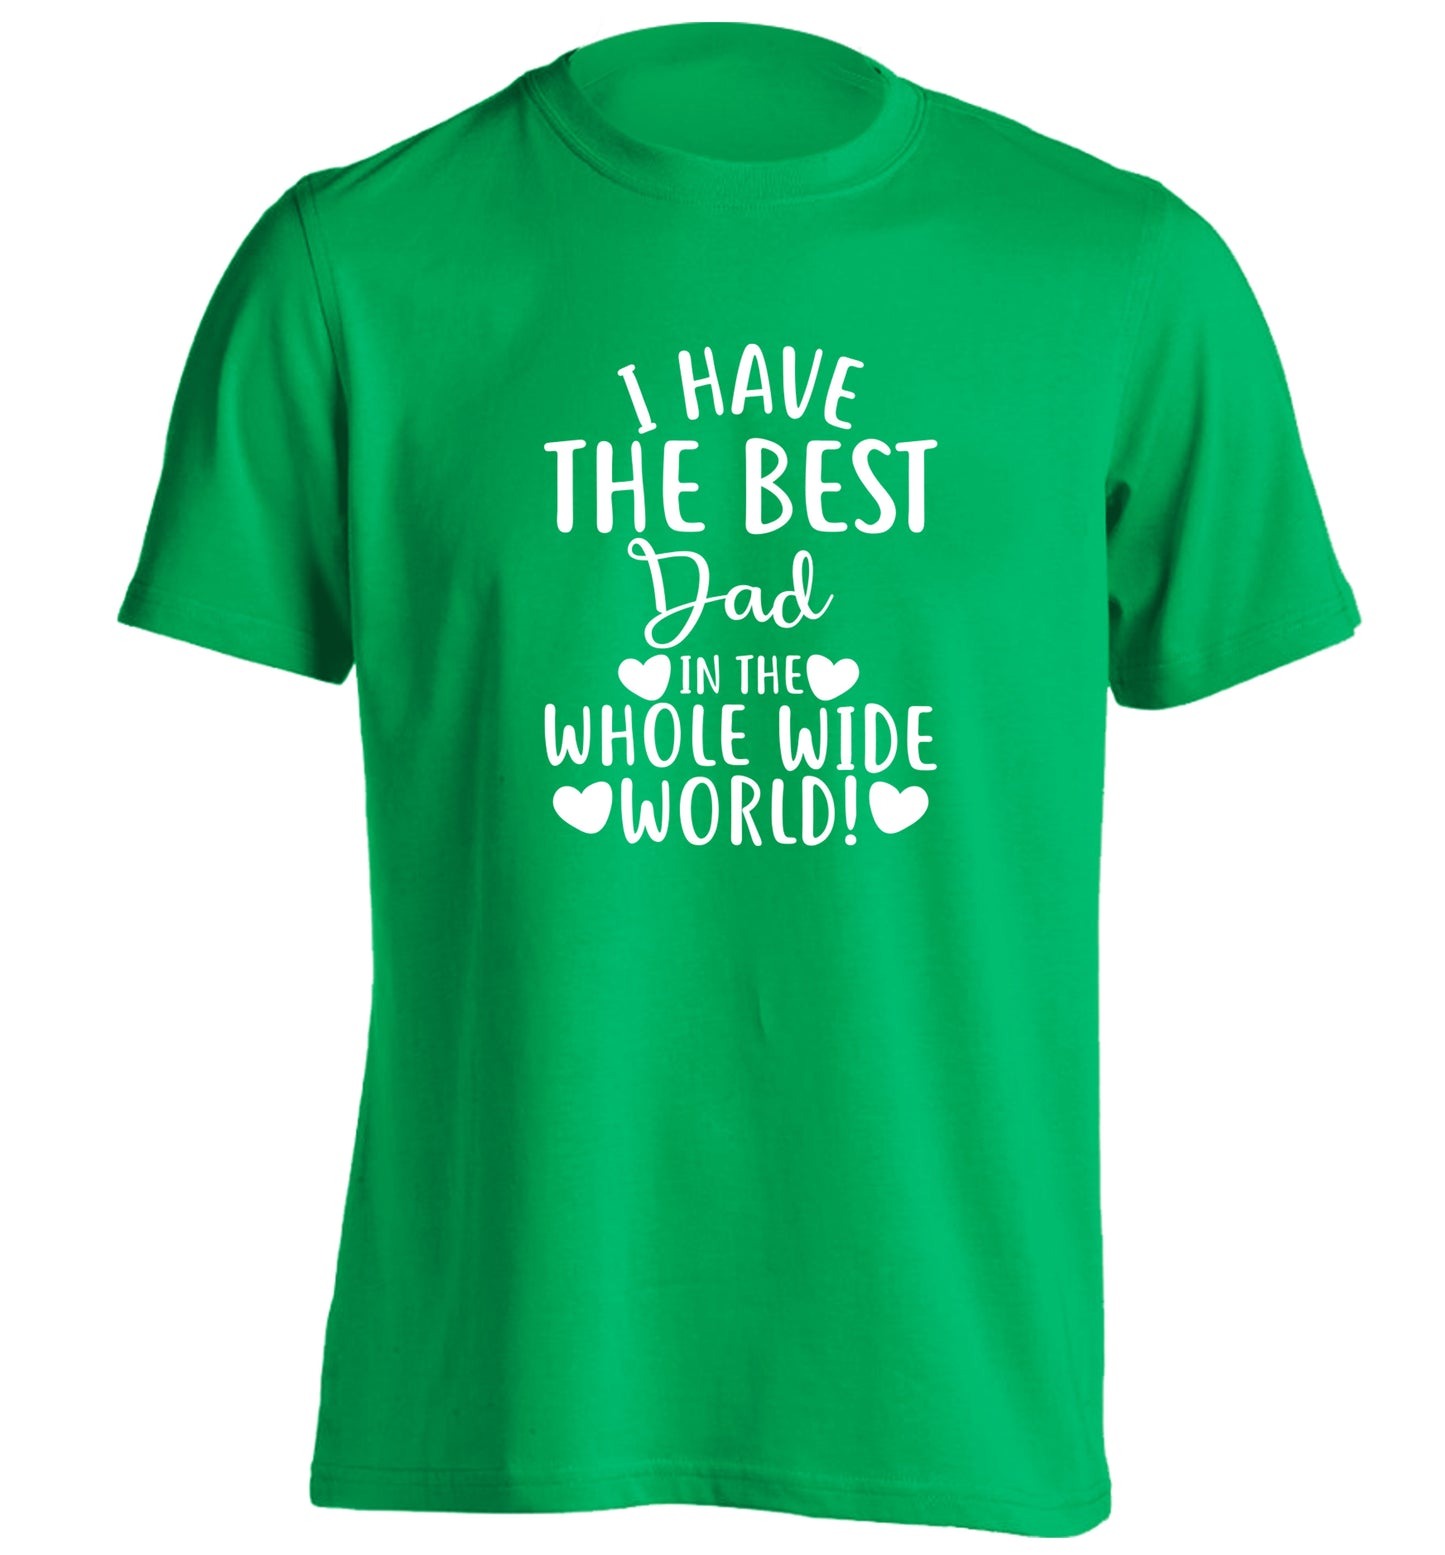 I have the best dad in the whole wide world! adults unisex green Tshirt 2XL